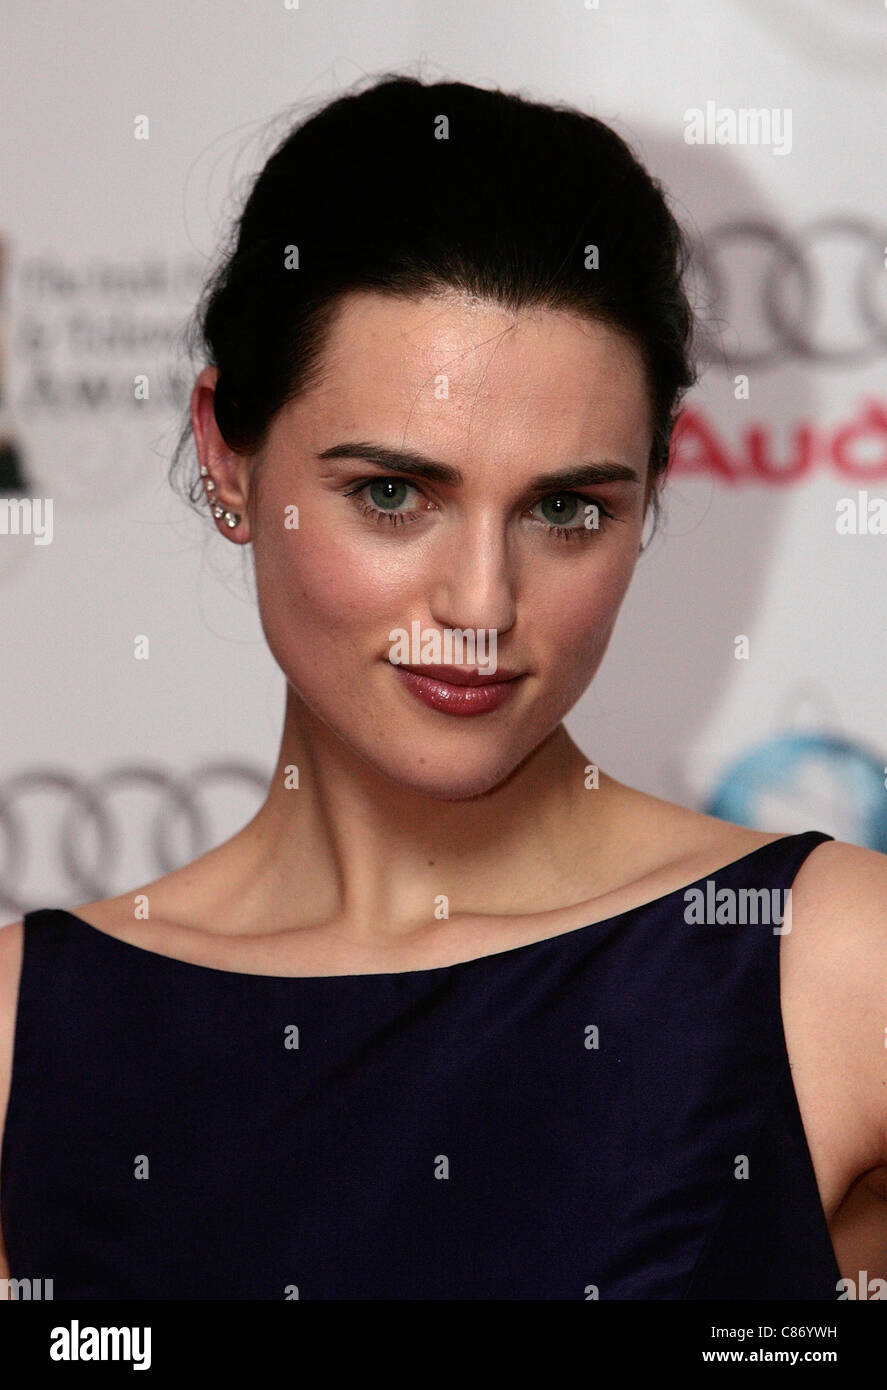 DUBLIN, IRELAND - FEBRUARY 14: Katie McGrath attends the press room at the 6th Annual Irish Film and Television Awards at the Burlington Hotel on February 14, 2009 in Dublin, Ireland Stock Photo